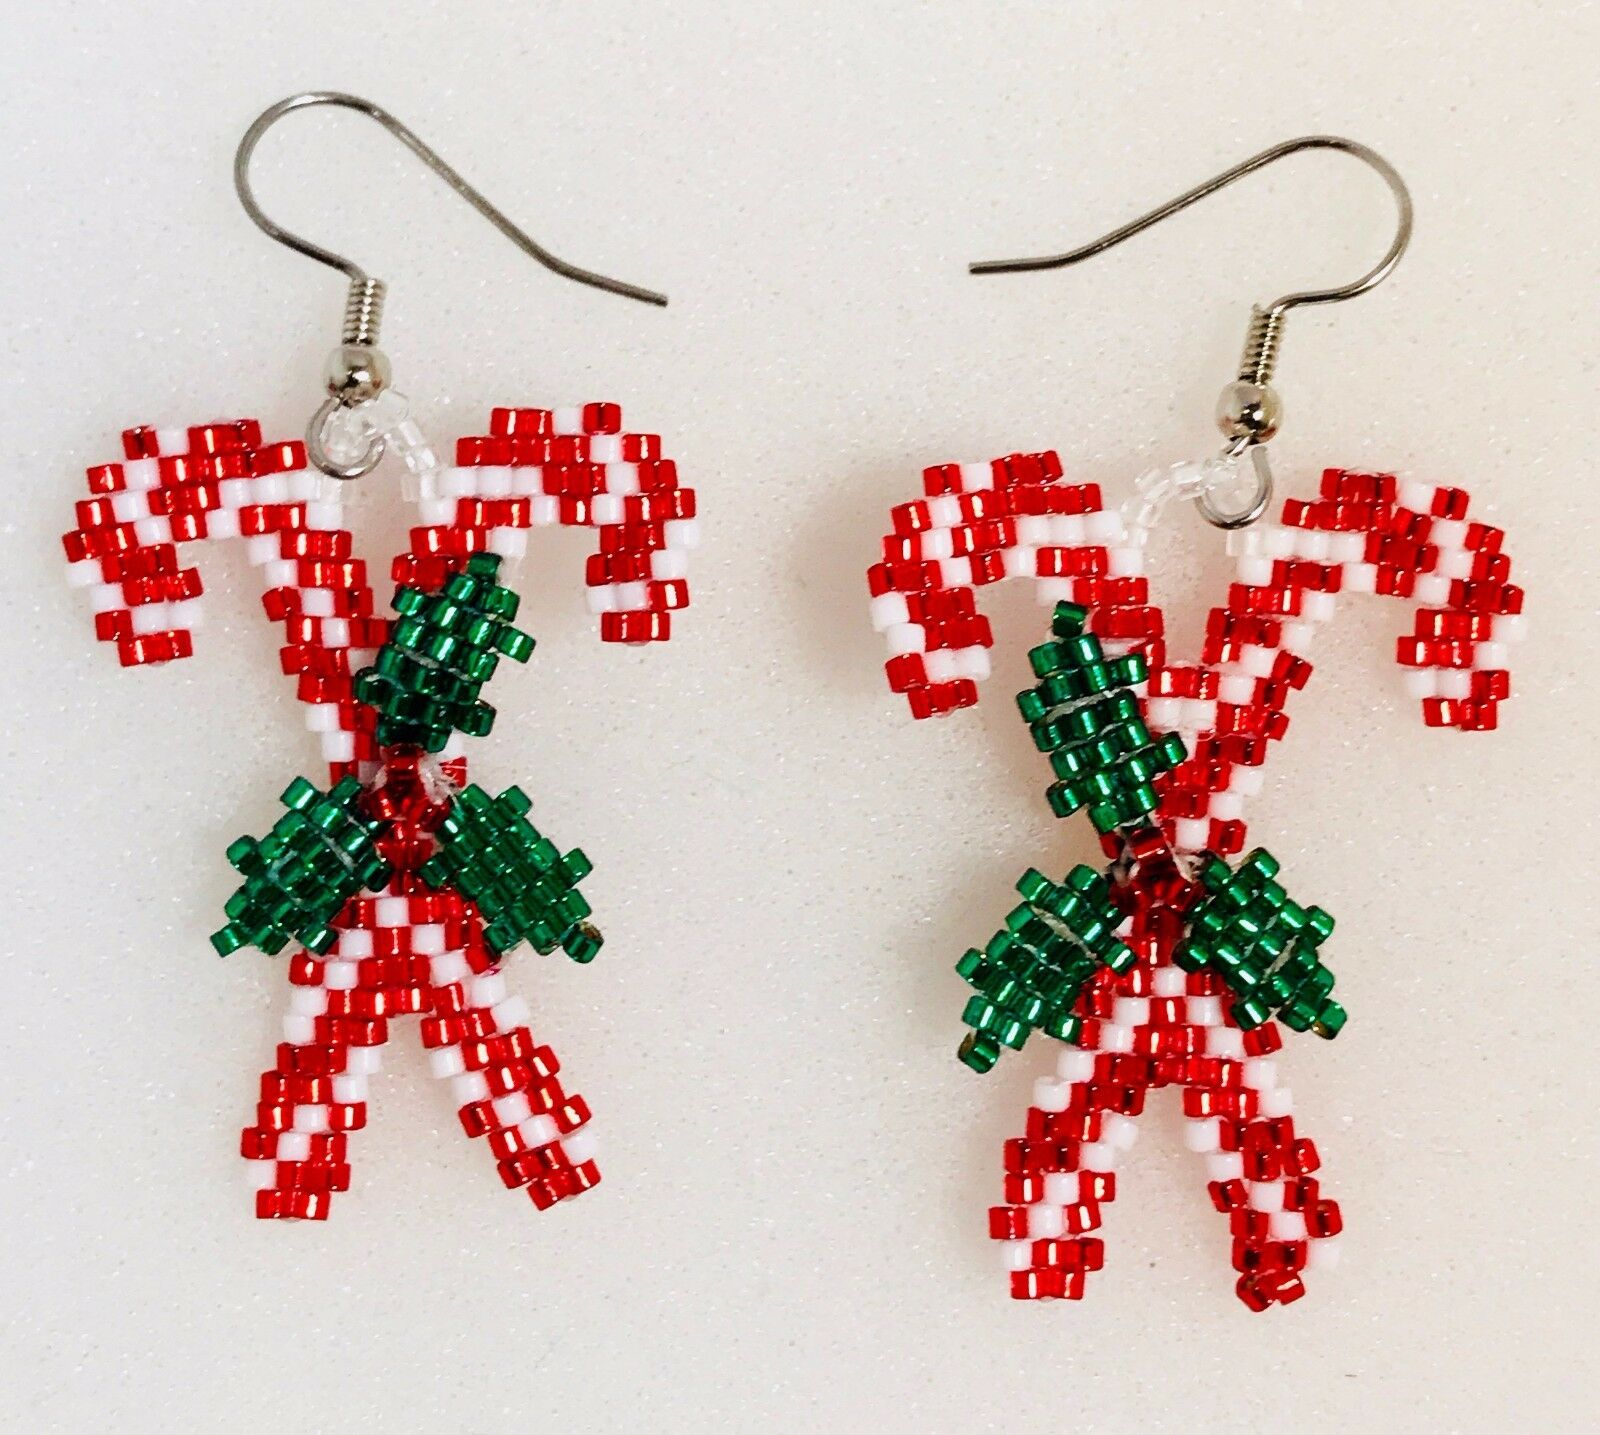 Winter Workshop Crystal Bead Set in Candy Cane - Jesse James Beads